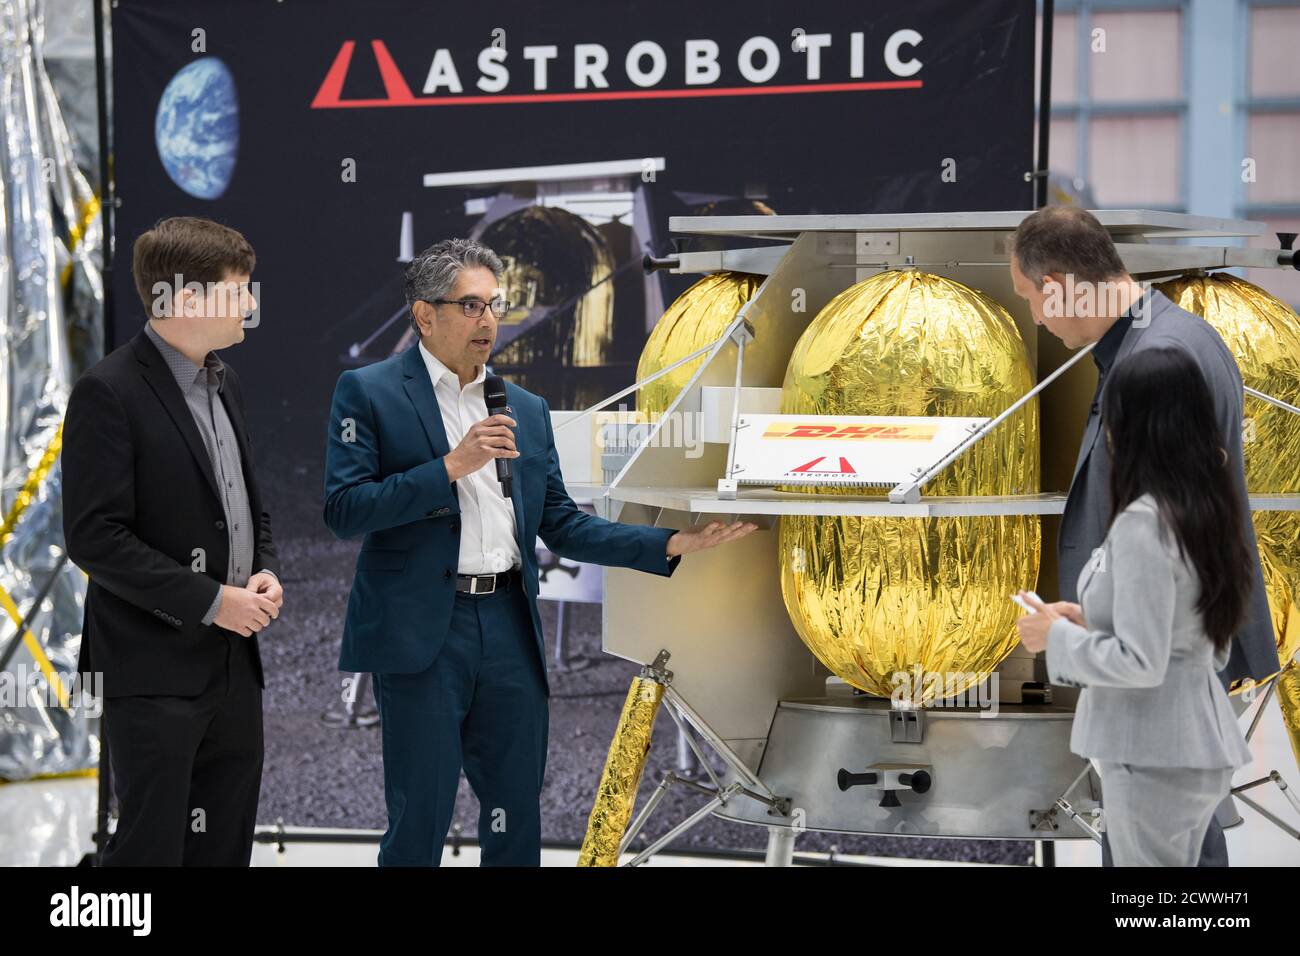 Commercial Lunar Payload Services Announcement NASA Associate Administrator, Science Mission Directorate, Thomas Zurbuchen, second from right, speaks to Astrobotic CEO, John Thornton, left, and Astrobotic Mission Director, Sharad Bhaskaran, second from left, about their lunar lander, Friday, May 31, 2019, at Goddard Space Flight Center in Md. Astrobotic, Intuitive Machines, and Orbit Beyond have been selected to provide the first lunar landers for the Artemis program's lunar surface exploration. ' Stock Photo